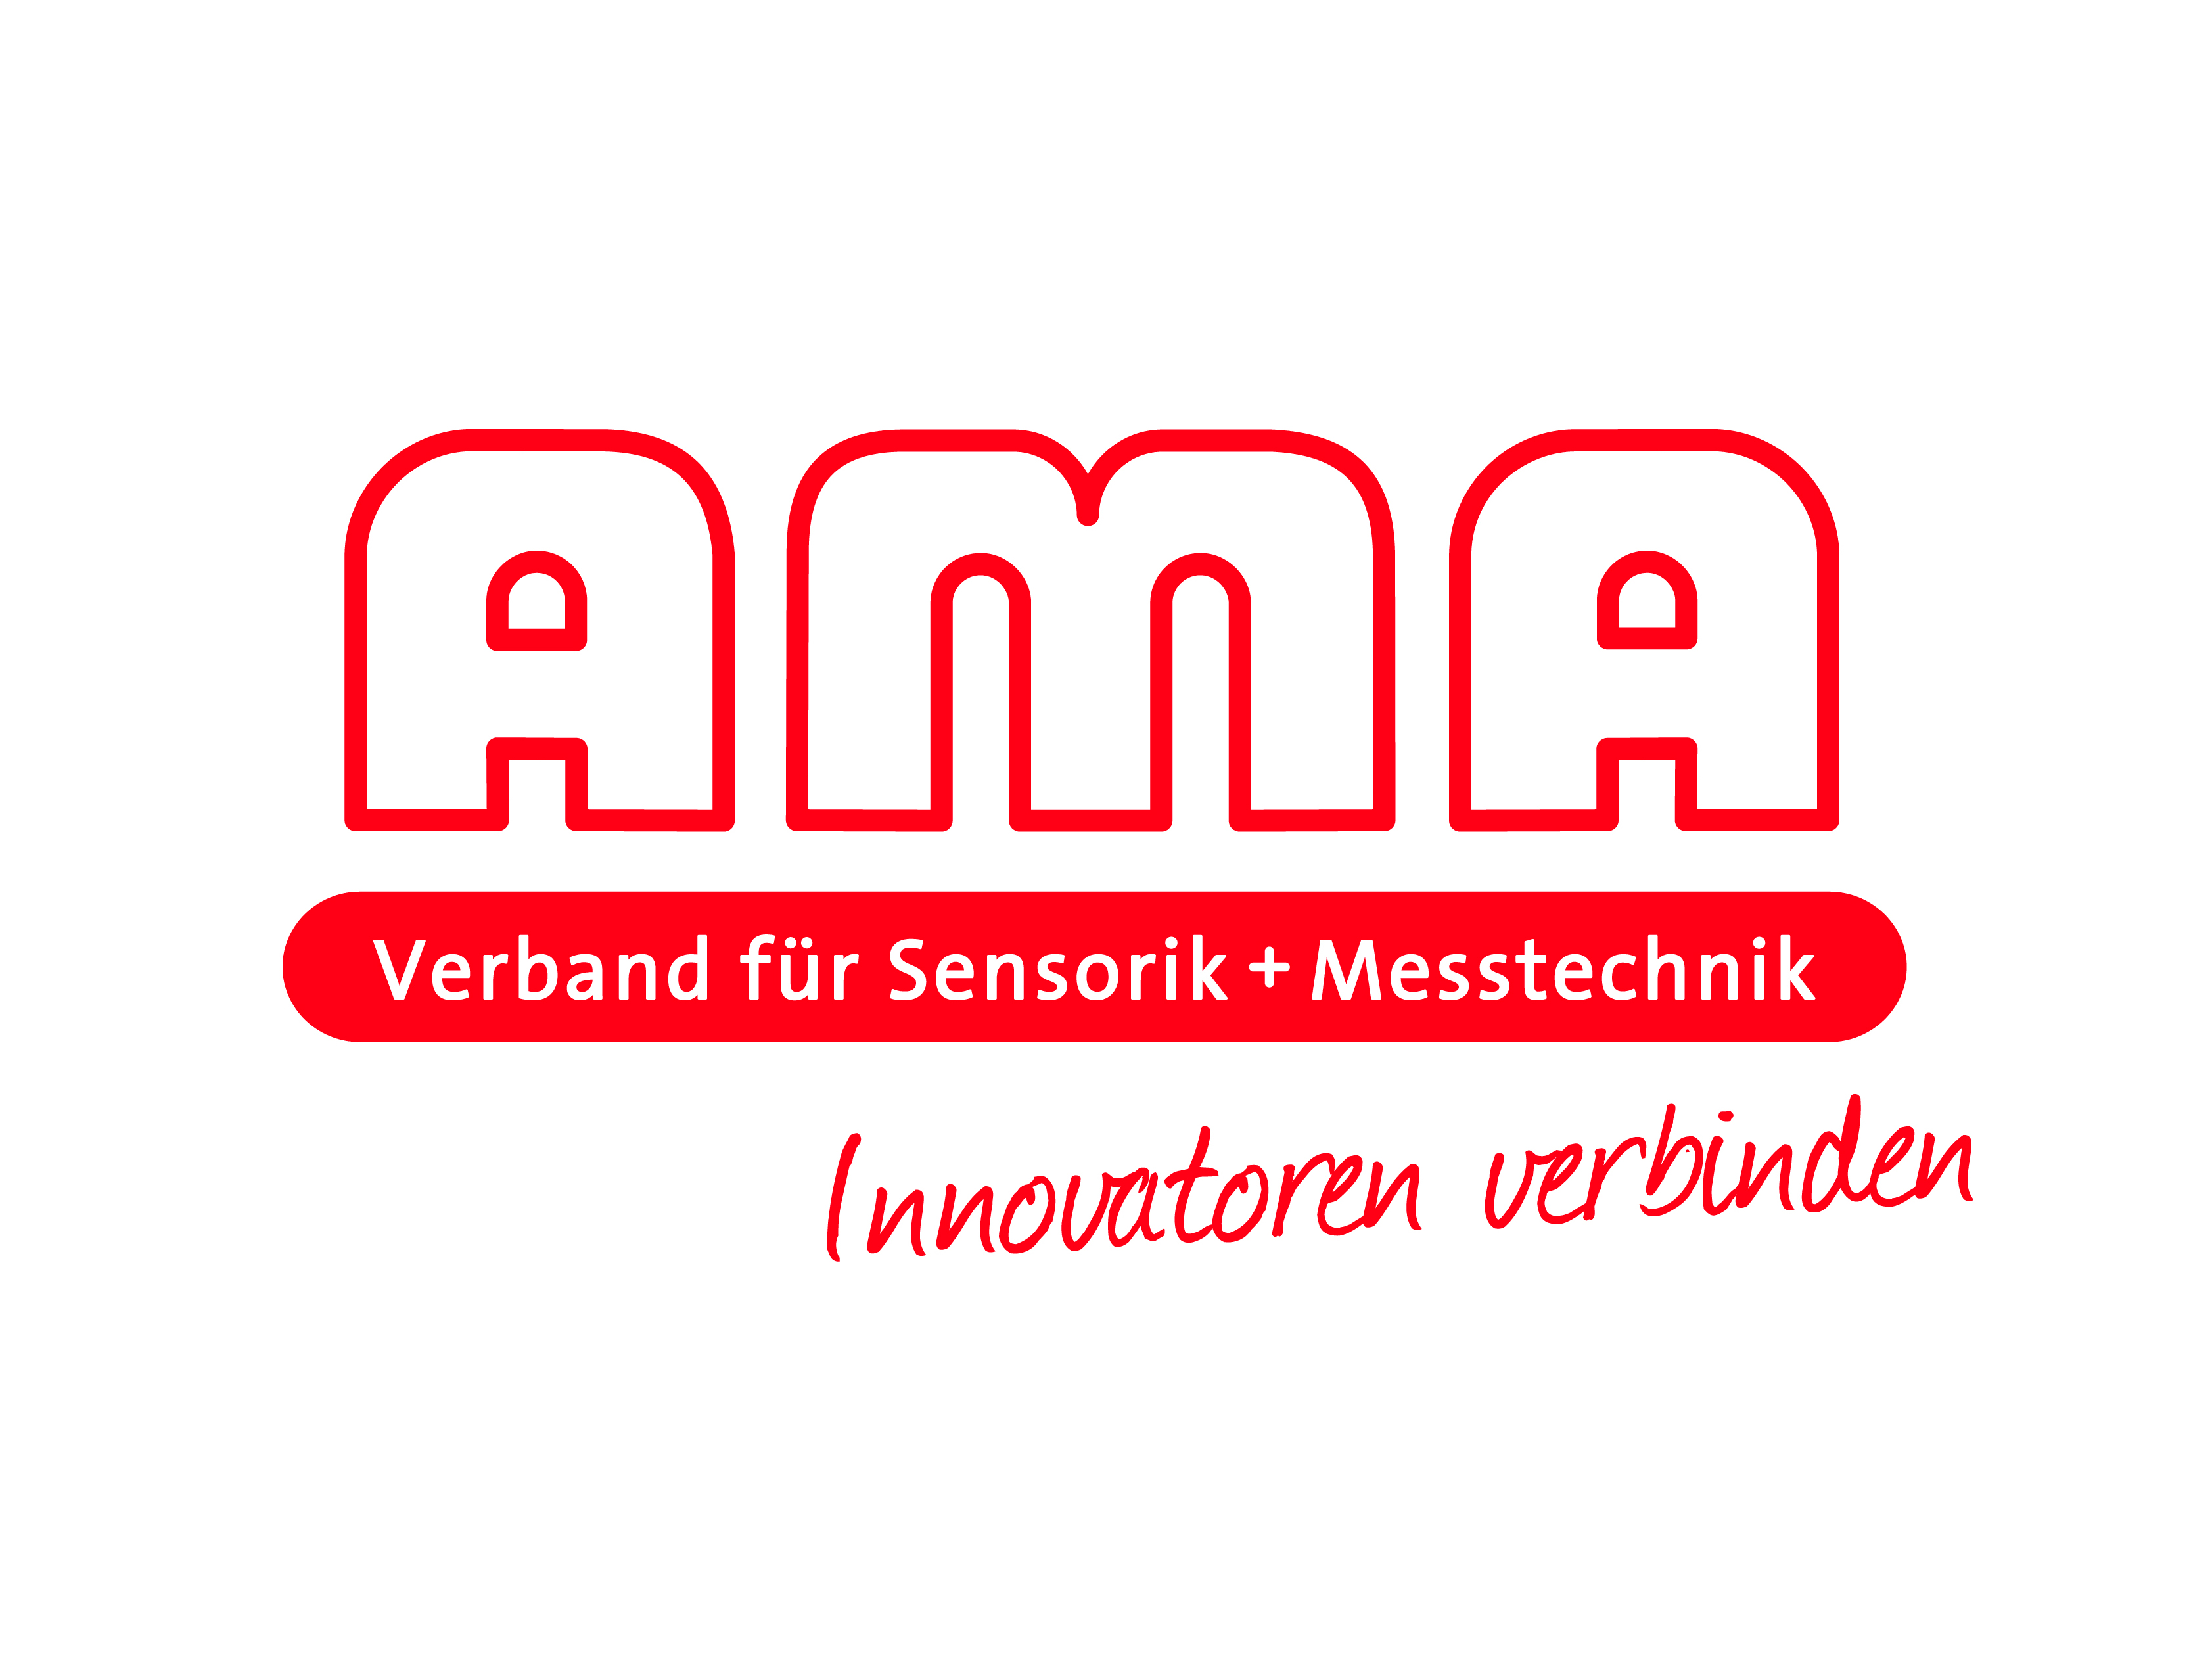 The image shows the logo of AMA on a white background